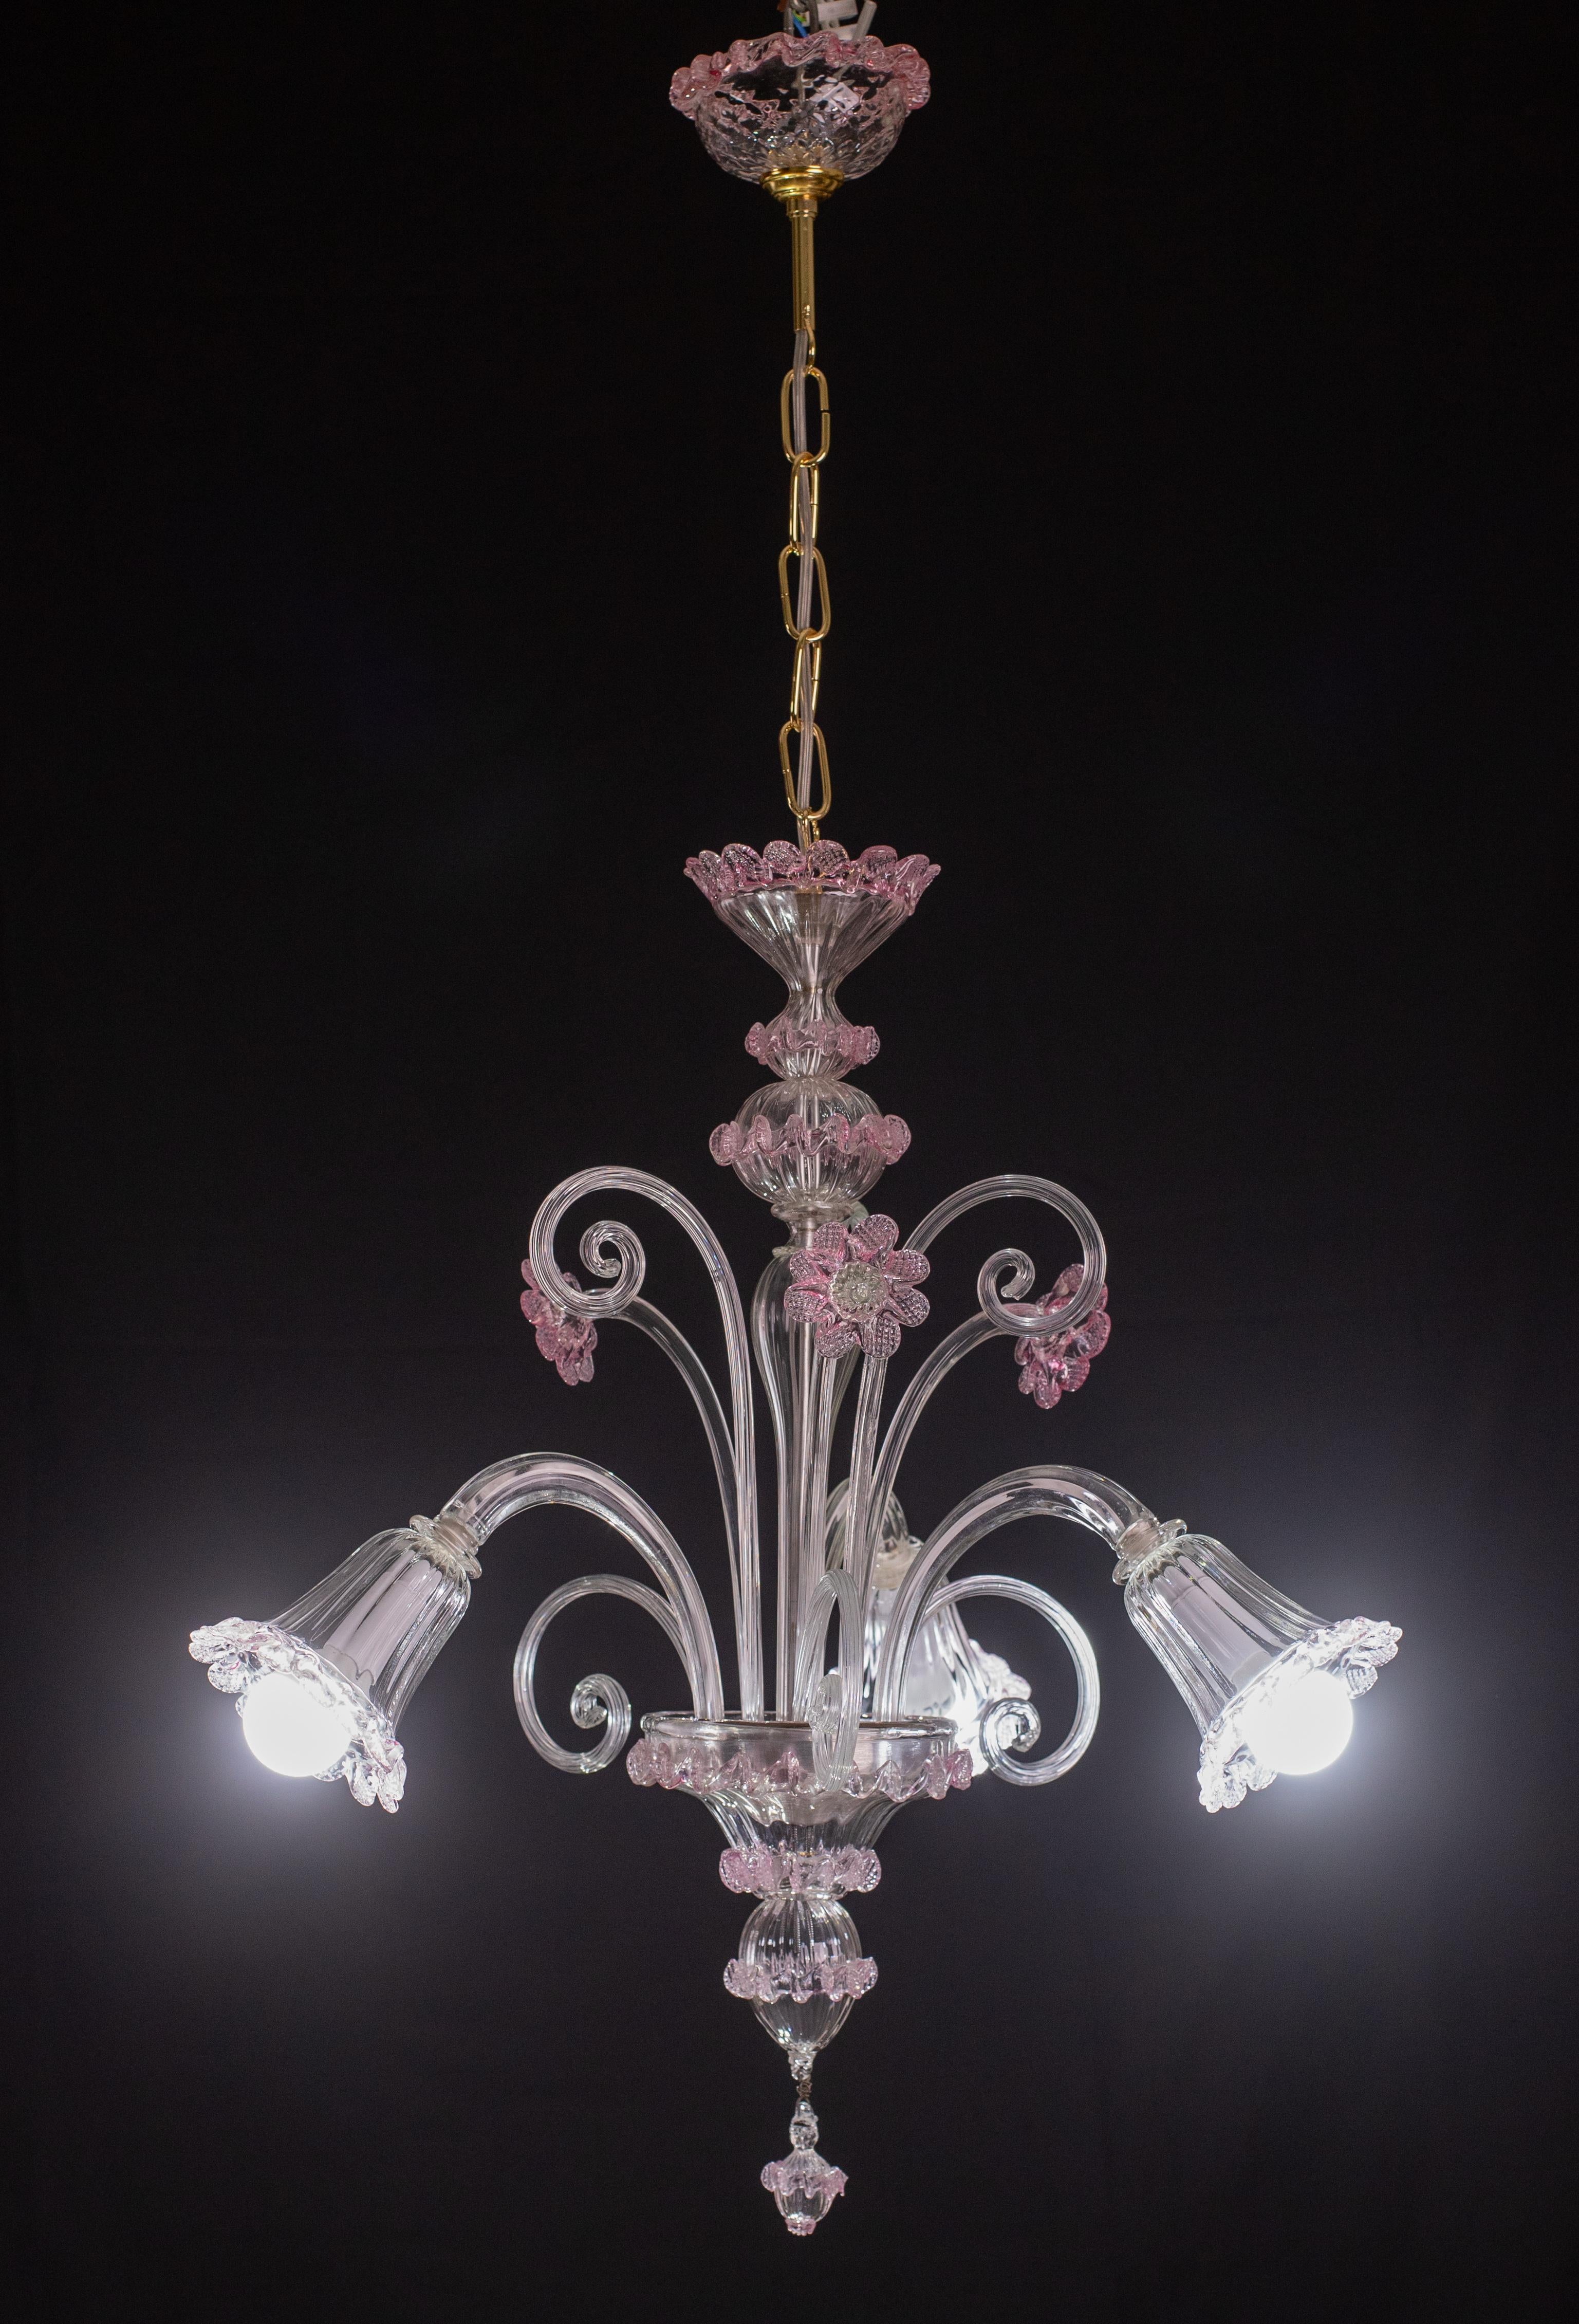 Pretty Murano chandelier, typical classic Venetian.

The chandelier has 3 arms that mount 3 e14 light points, European standards, possible to rewire for Usa.

The fixture is full of leaves and flowers, 3 high leaves, 3 low leaves and 3 flowers.

The